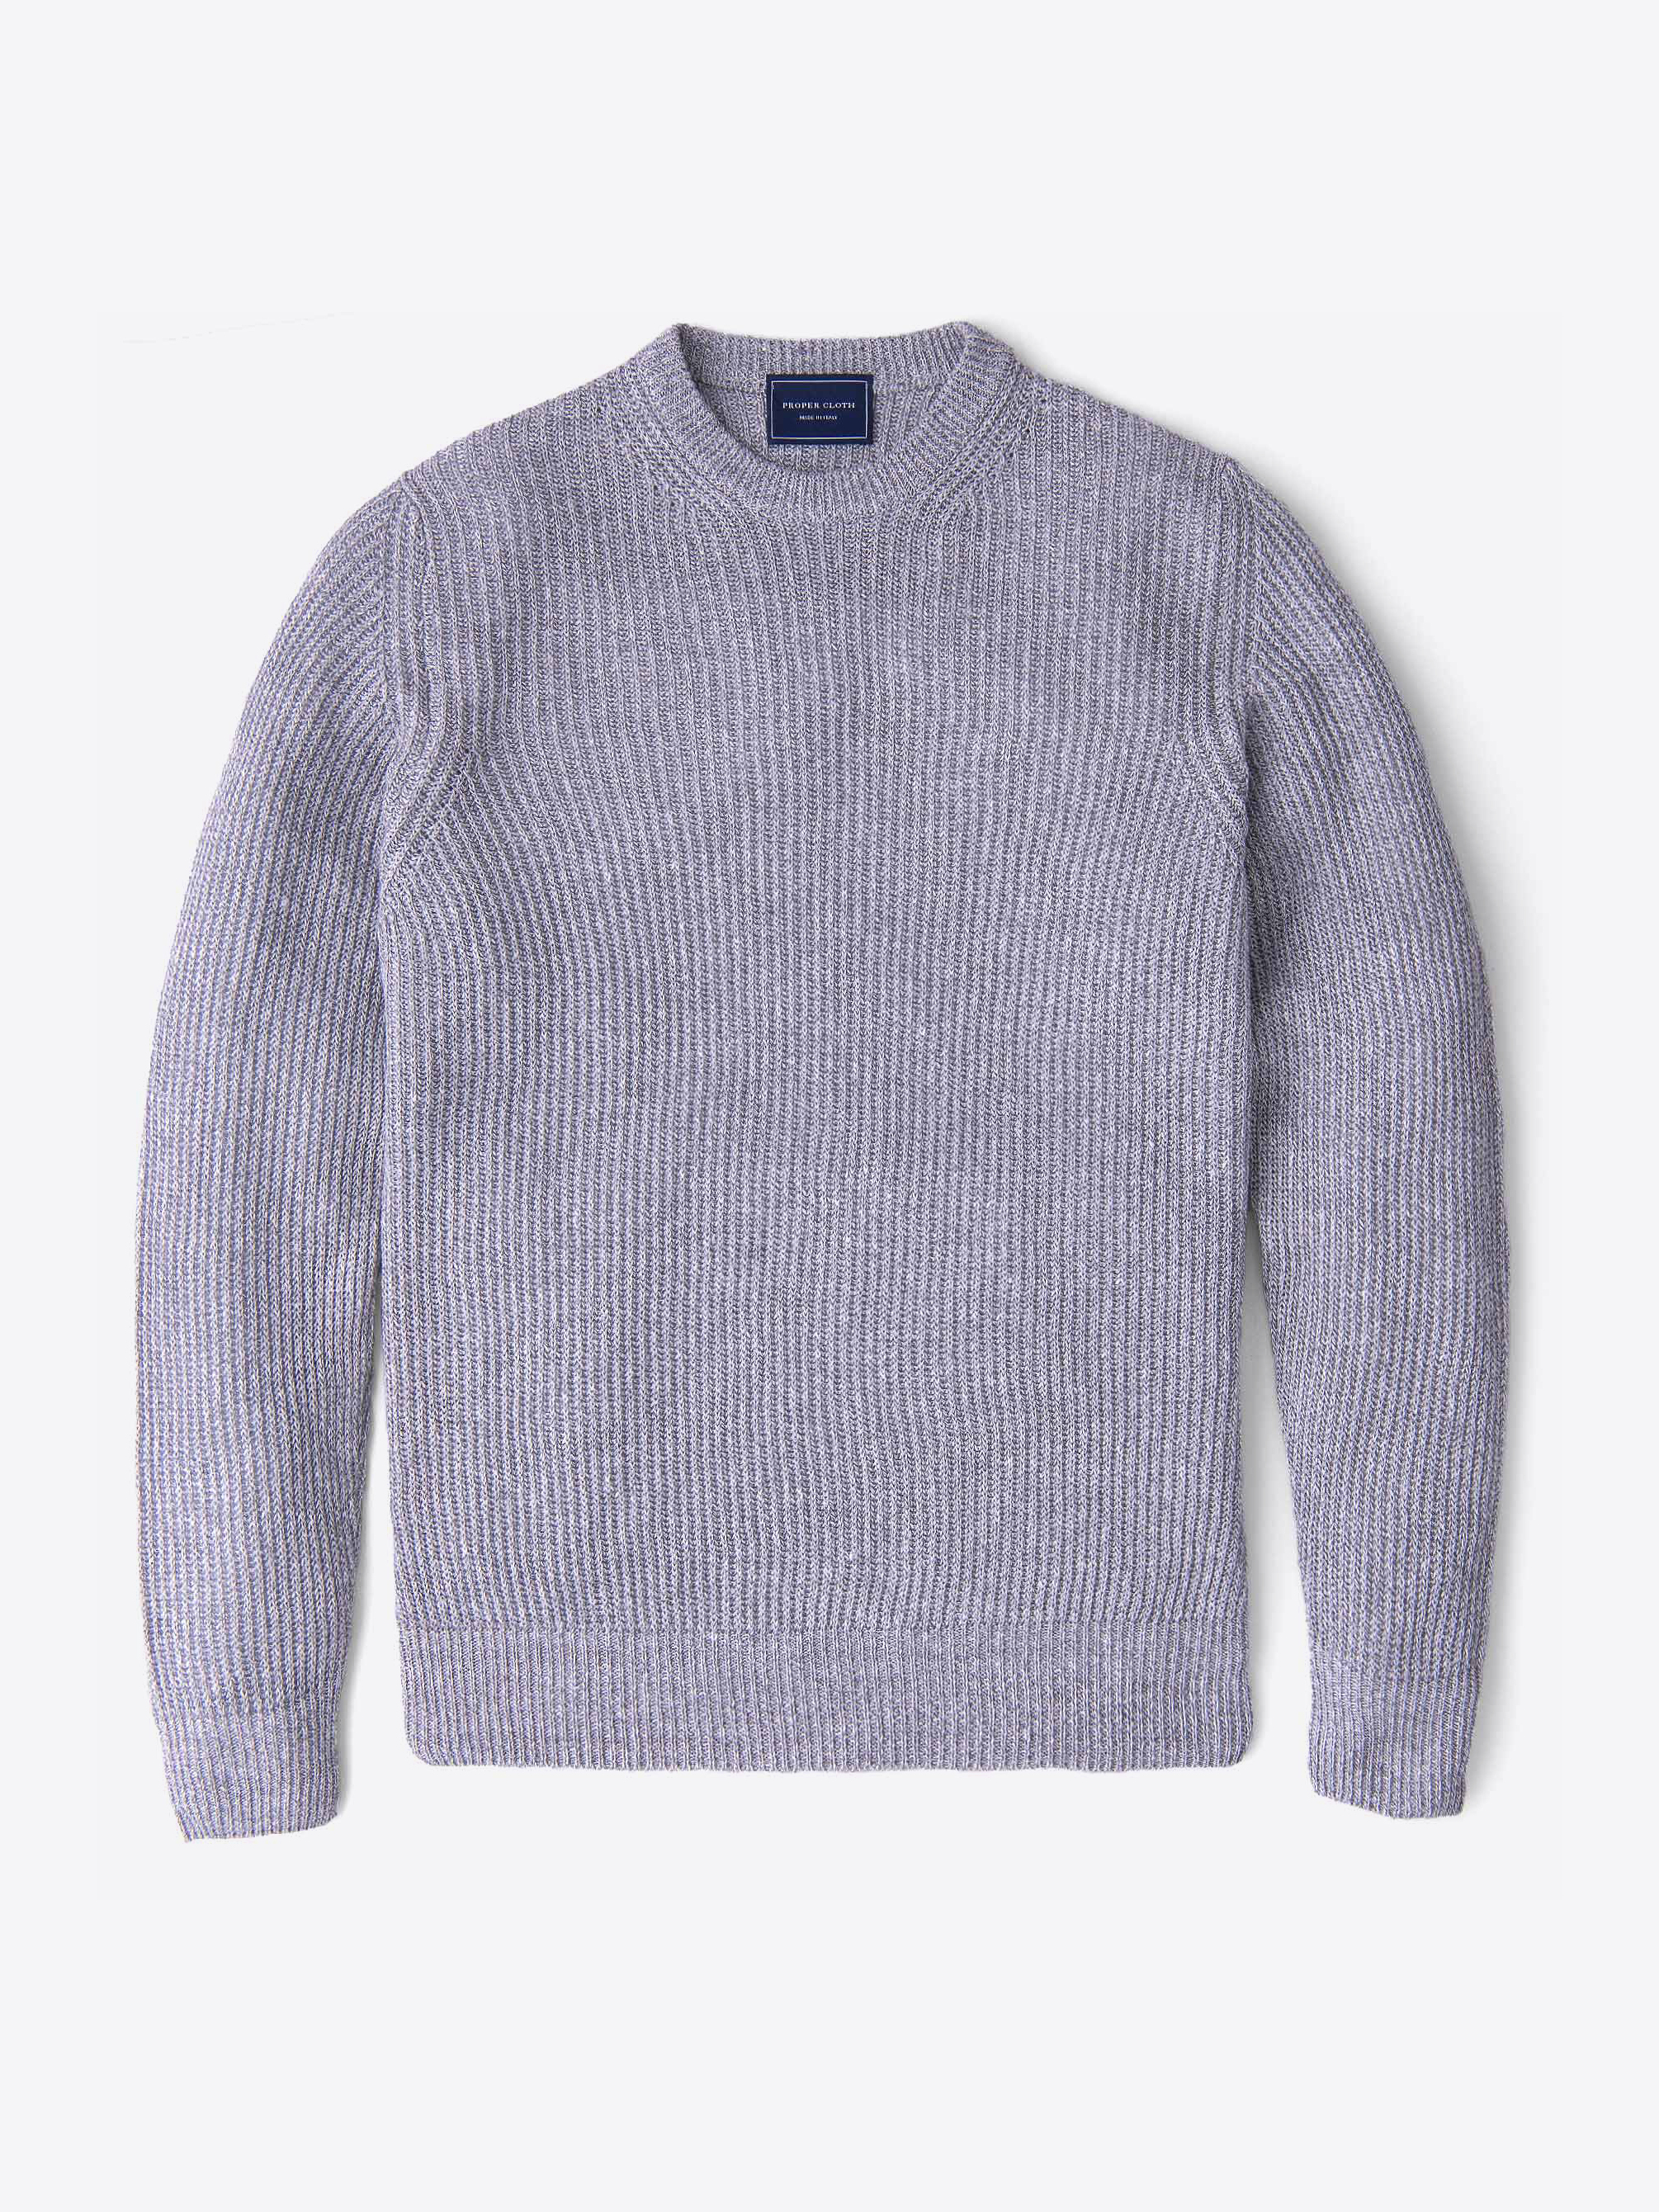 Zoom Image of Amalfi Grey Cotton and Linen Sweater